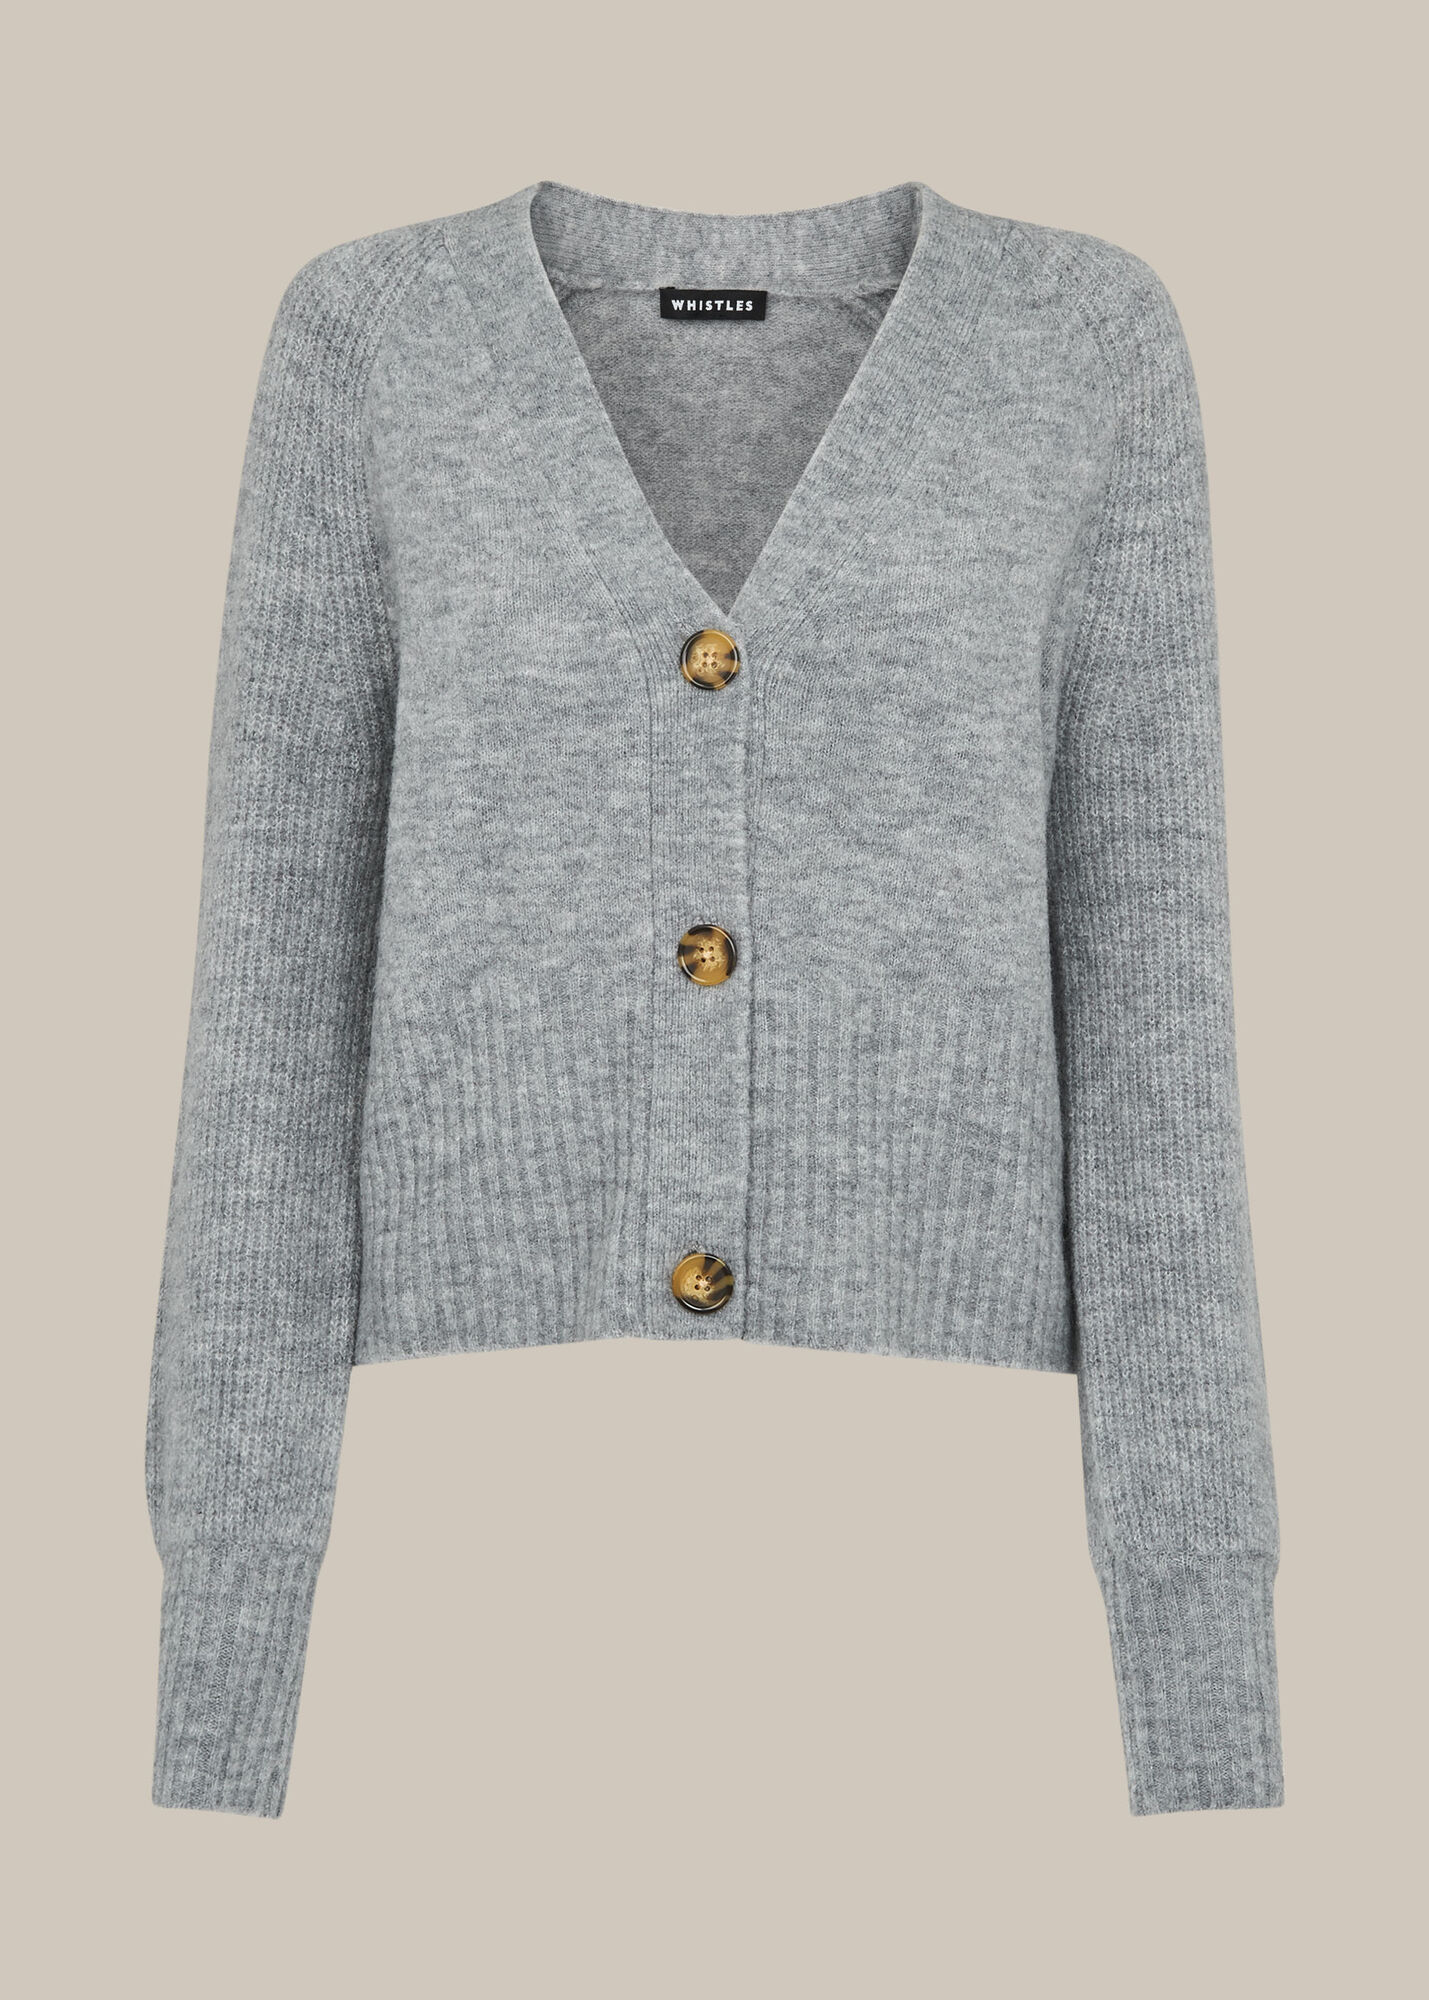 Grey Full Sleeve Knitted Cardigan | WHISTLES